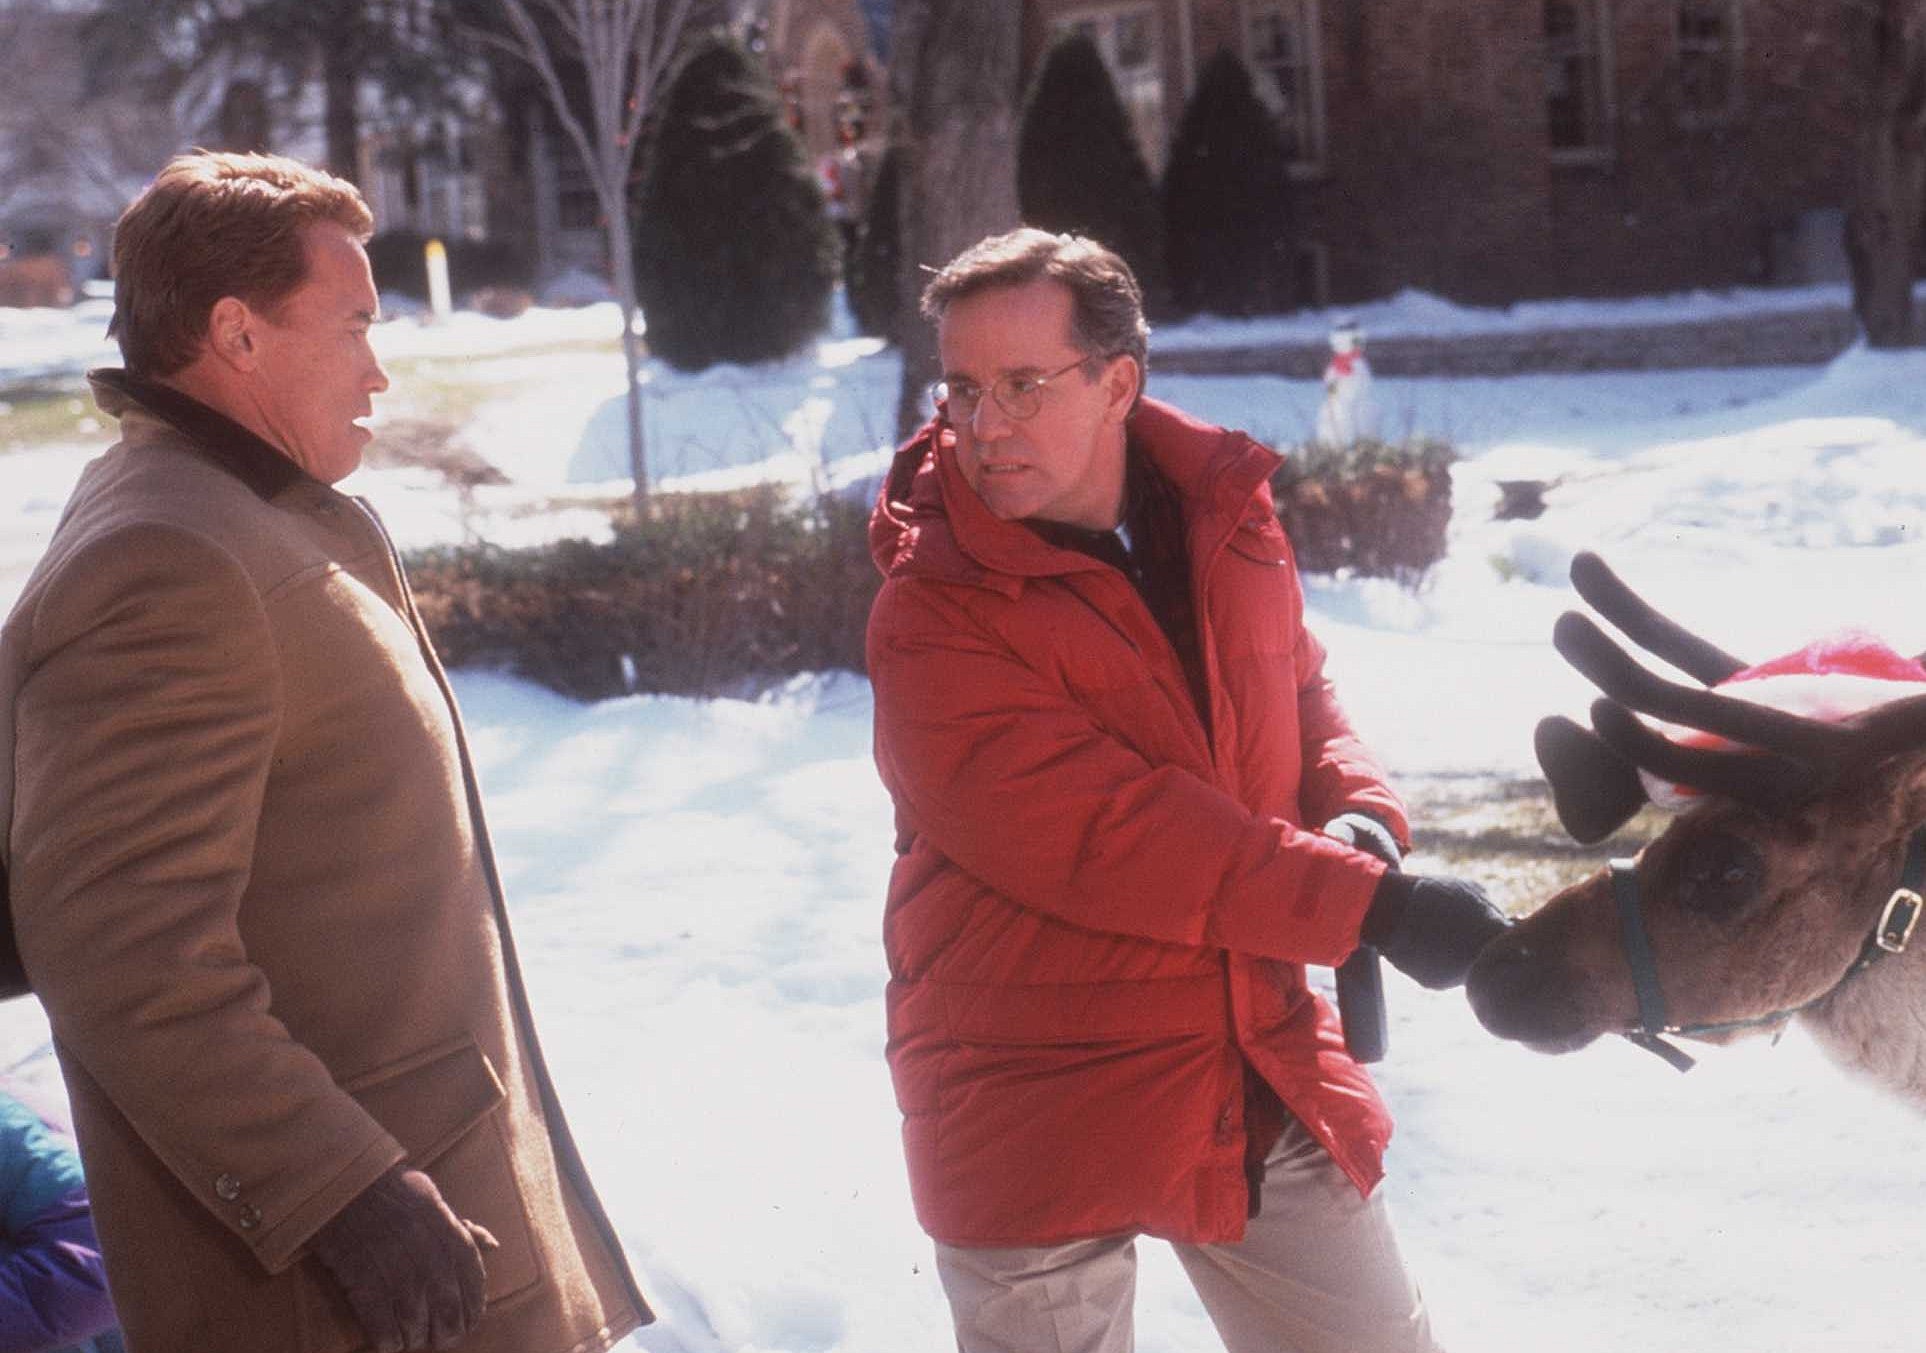 1996 Arnold Schwarzenegger and Phil Hartman stars in the new movie "Jingle All The Way".